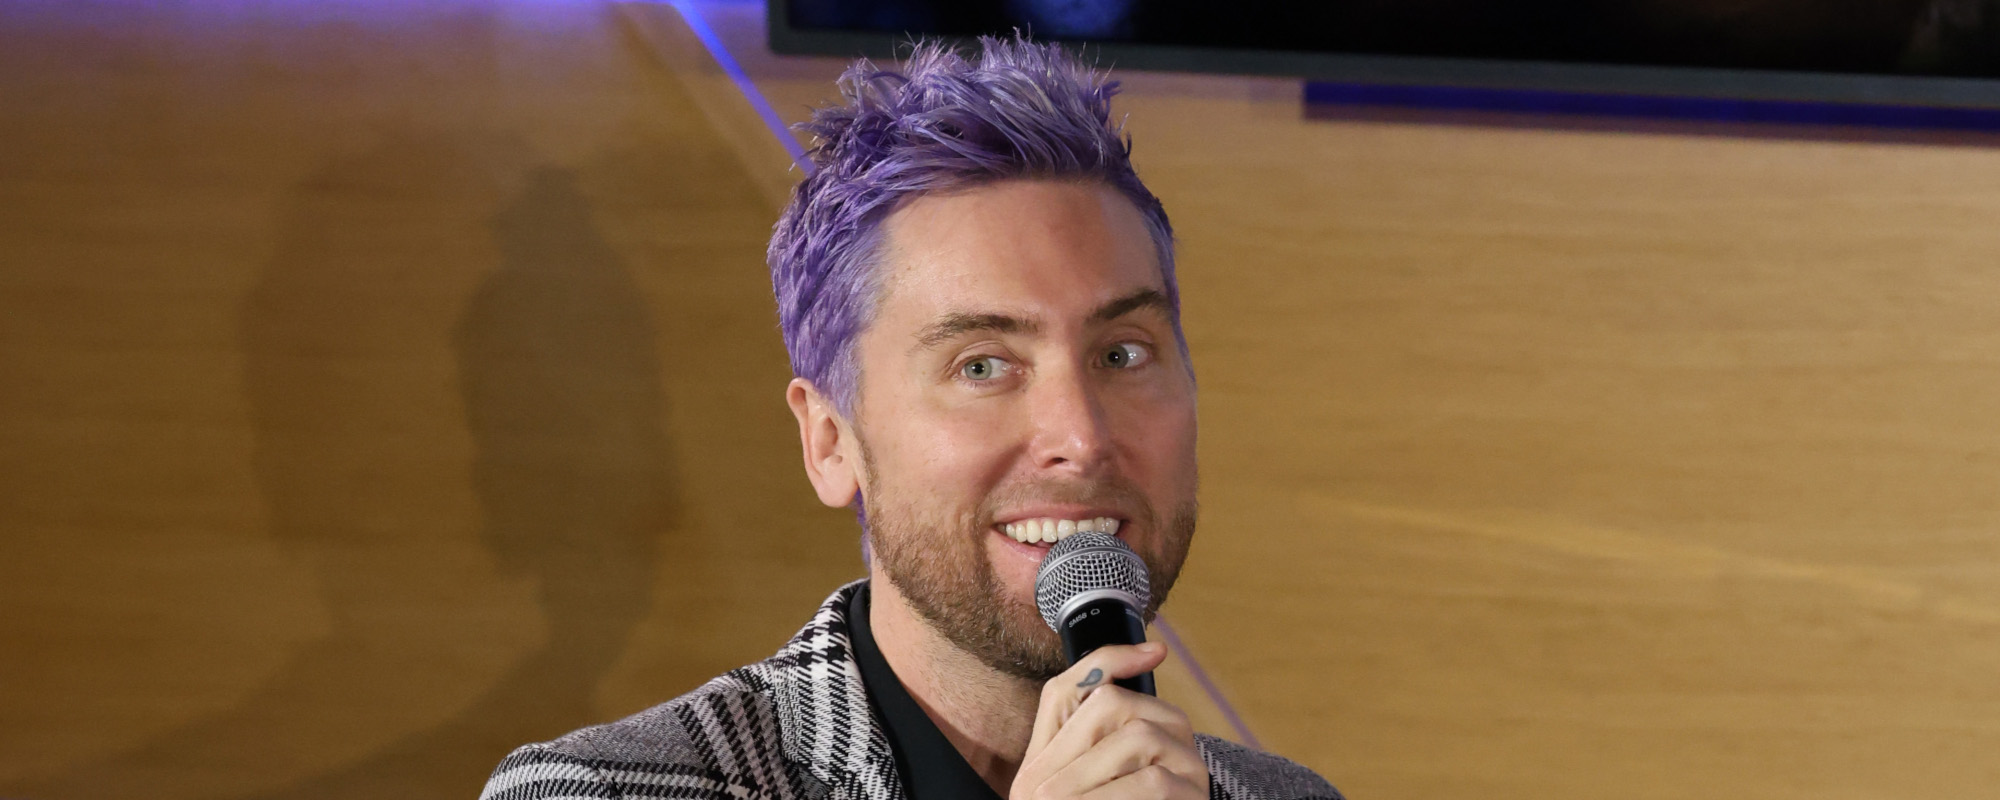 NSYNC’s Lance Bass Shares Life Update and Finding Financial Stability After the Band Breakup